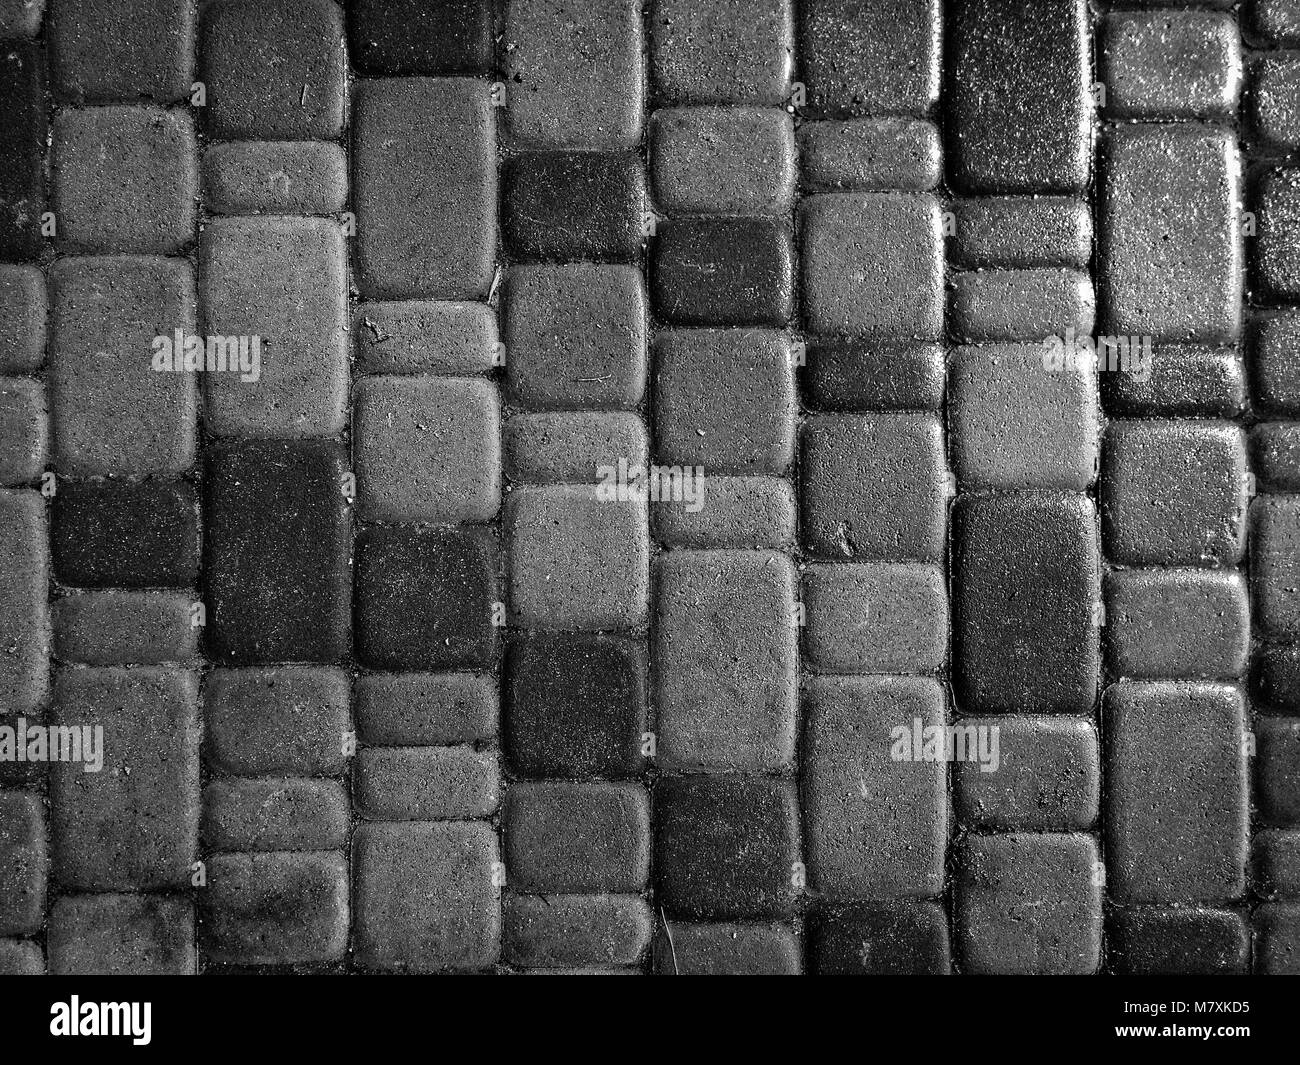 Paving stone texture Black and White Stock Photos & Images - Alamy